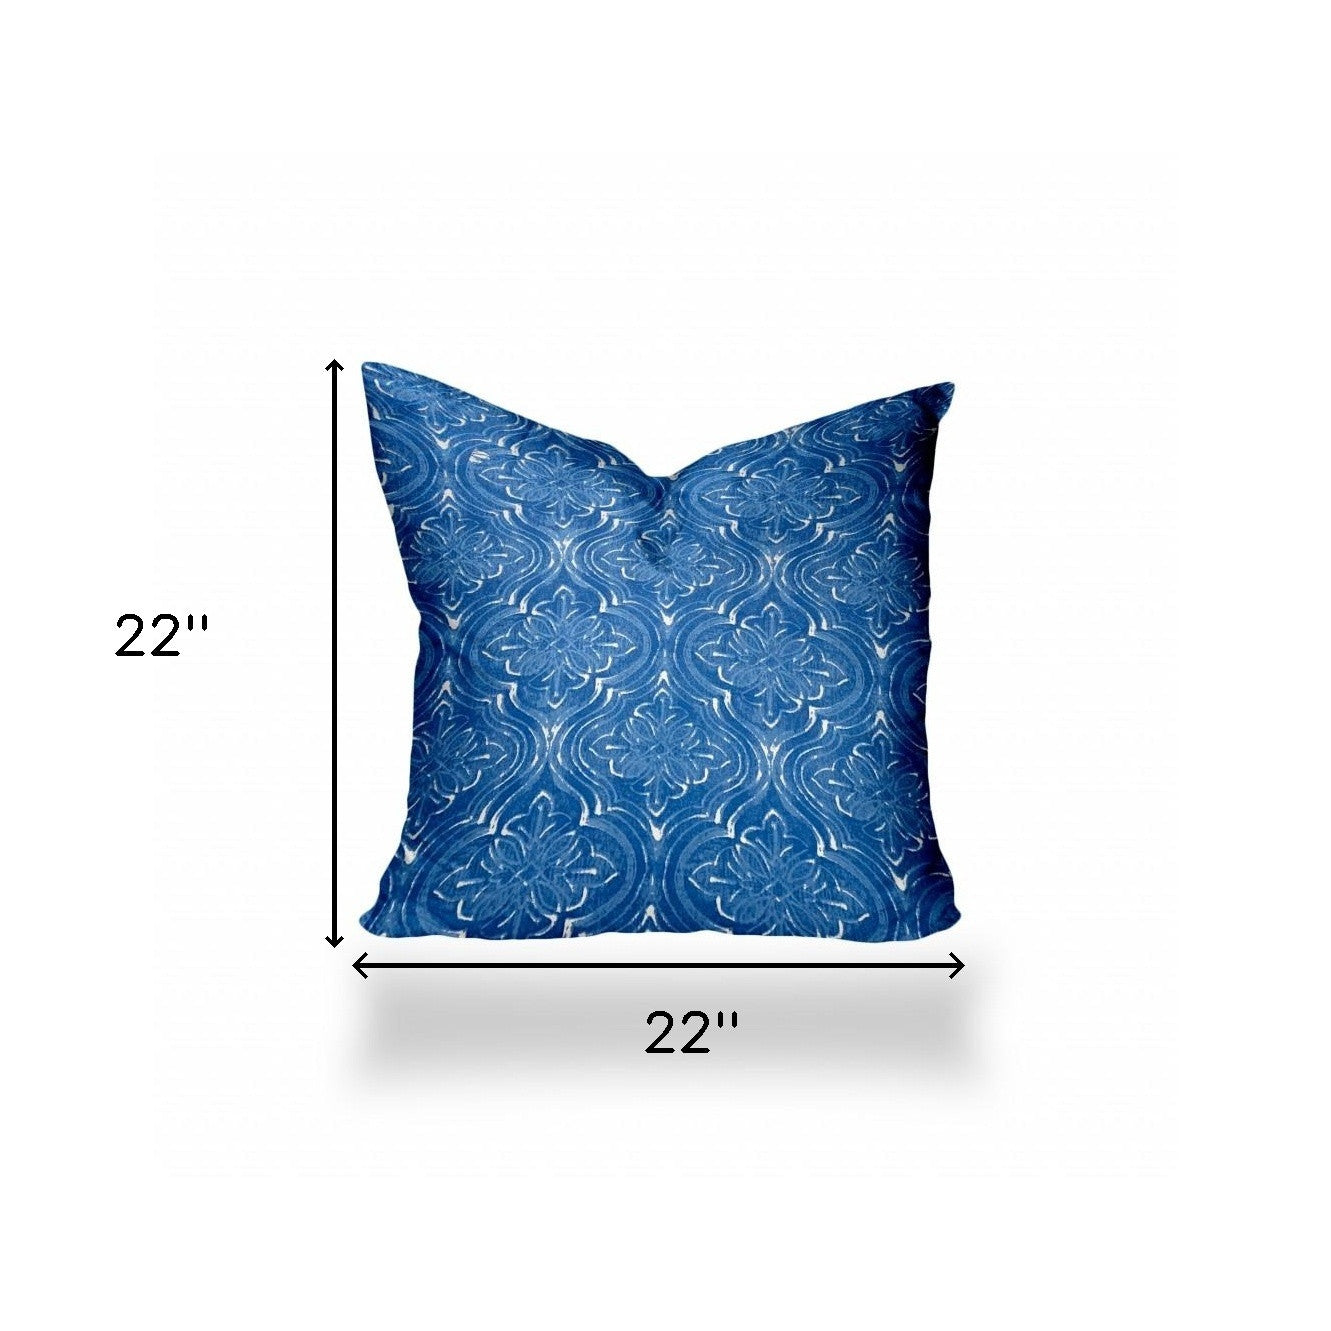 22" X 22" Blue And White Enveloped Ikat Throw Indoor Outdoor Pillow Cover